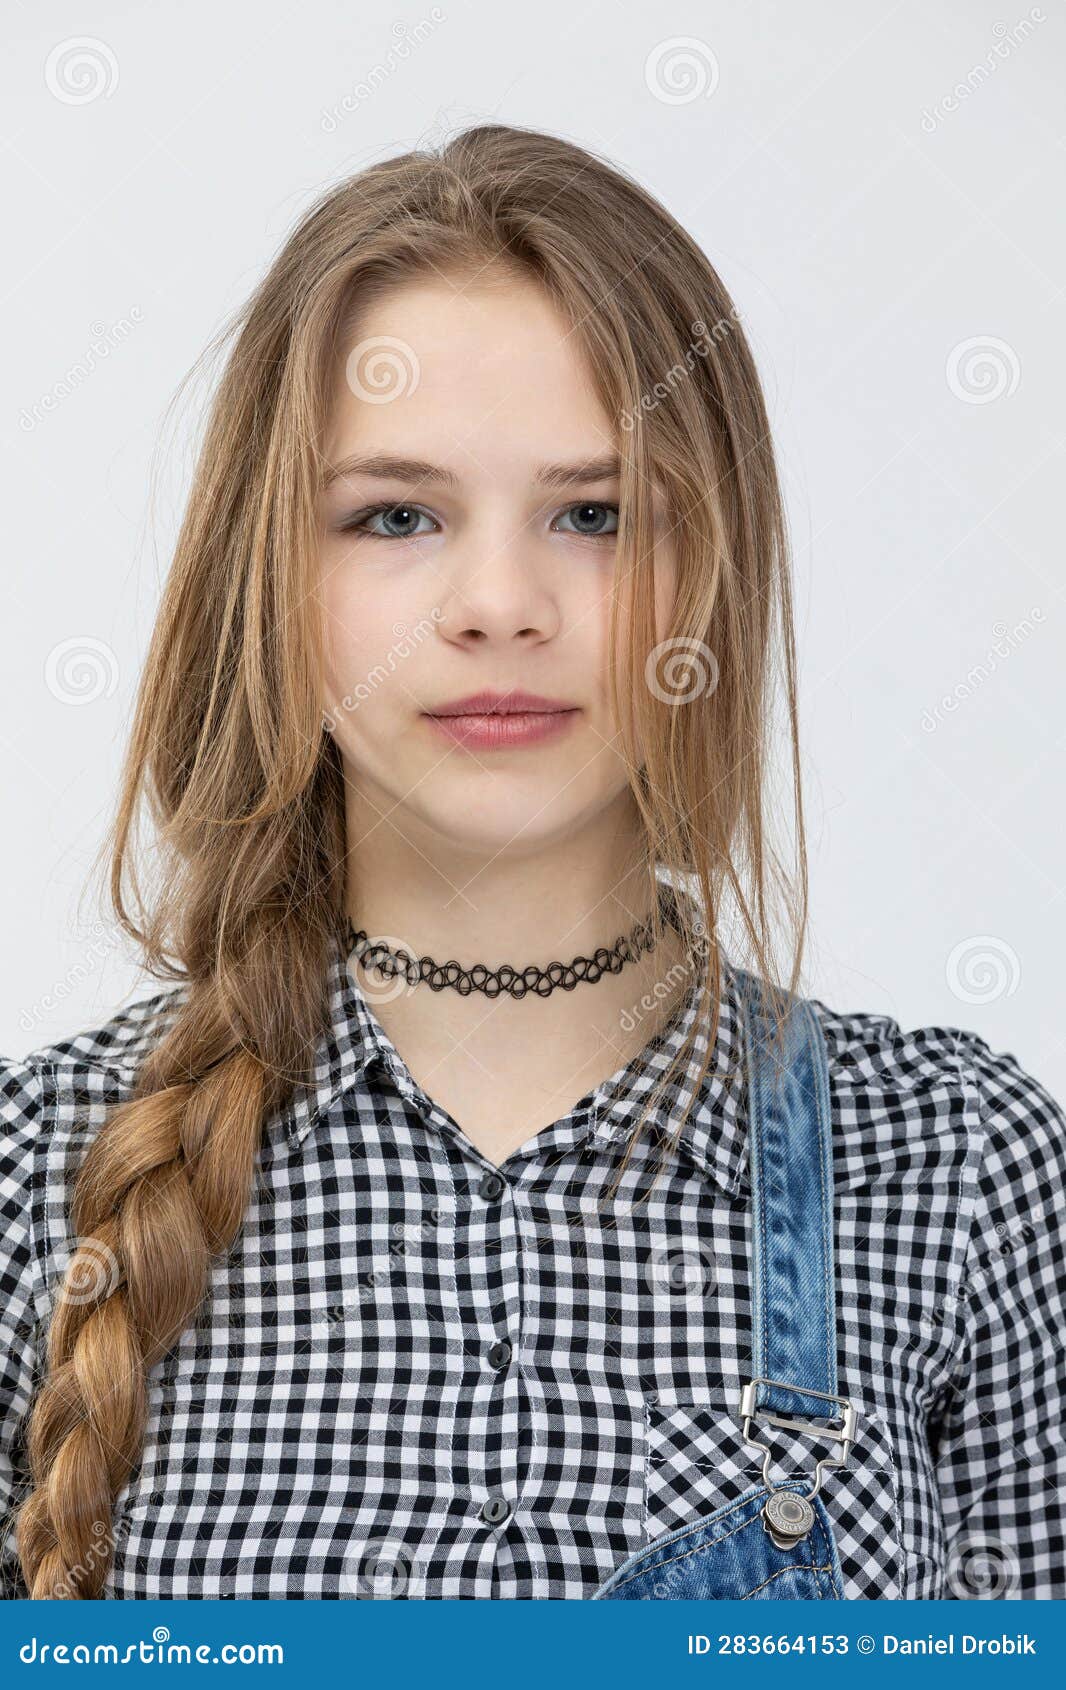 Bust of a Girl Standing in Front Combed in Braids Stock Image - Image ...